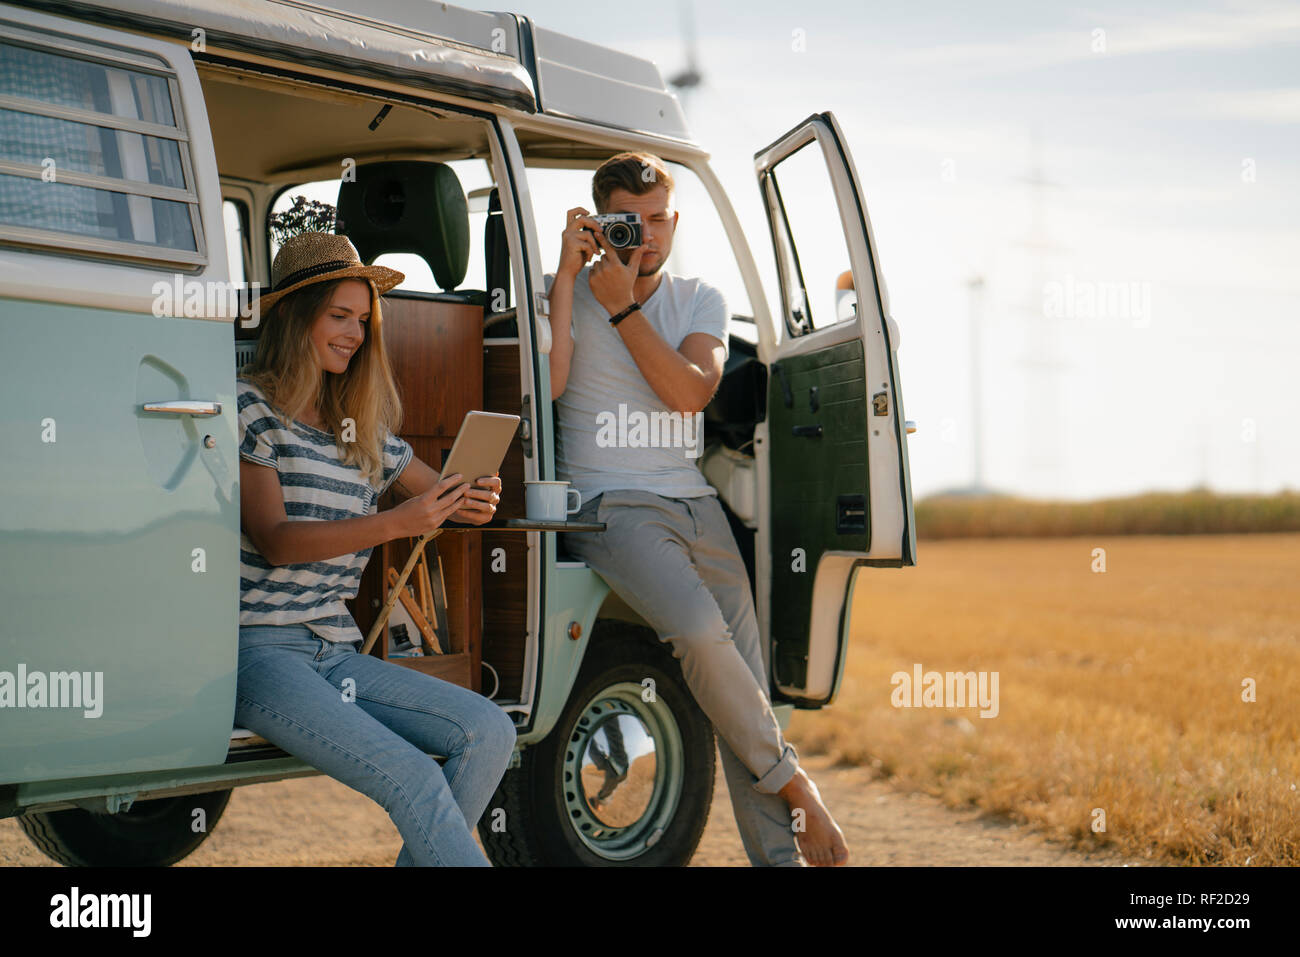 Young couple with tablet and camera at camper van in rural landscape Stock Photo